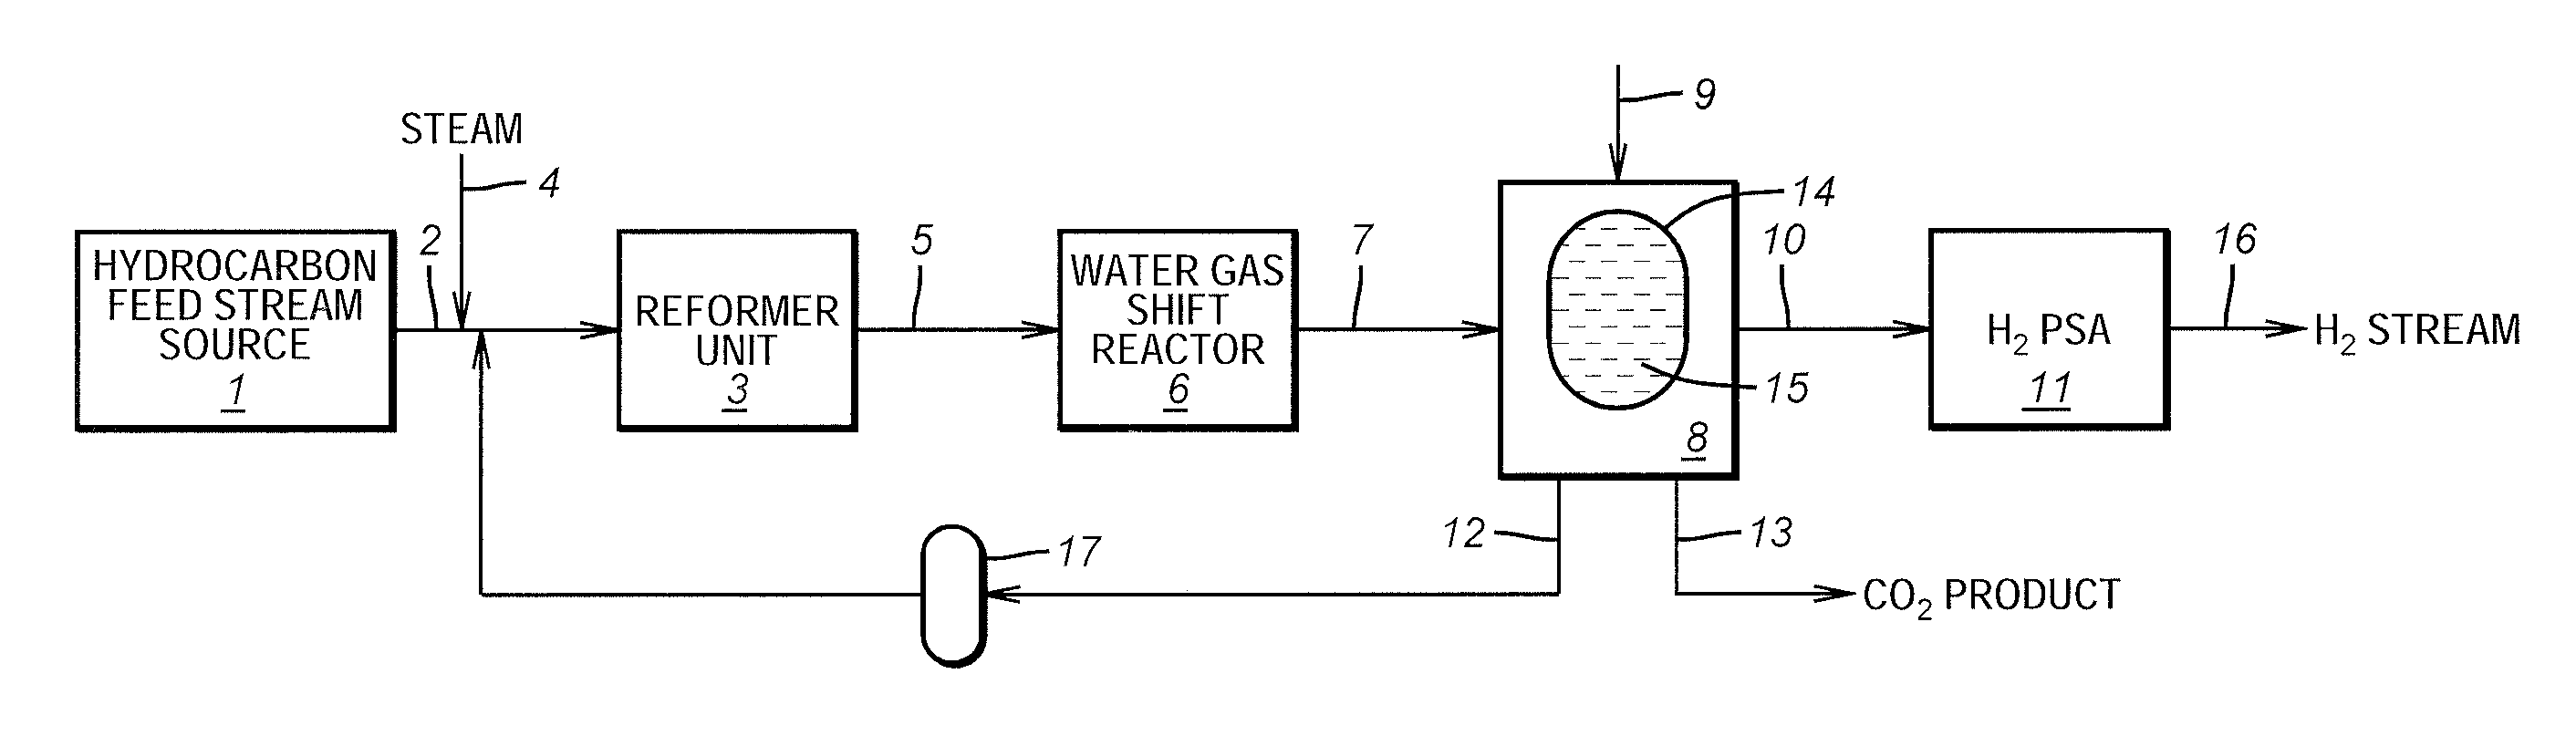 Process For The Production Of Hydrogen And Carbon Dioxide Utilizing Magnesium Based Sorbents In A Fixed Bed